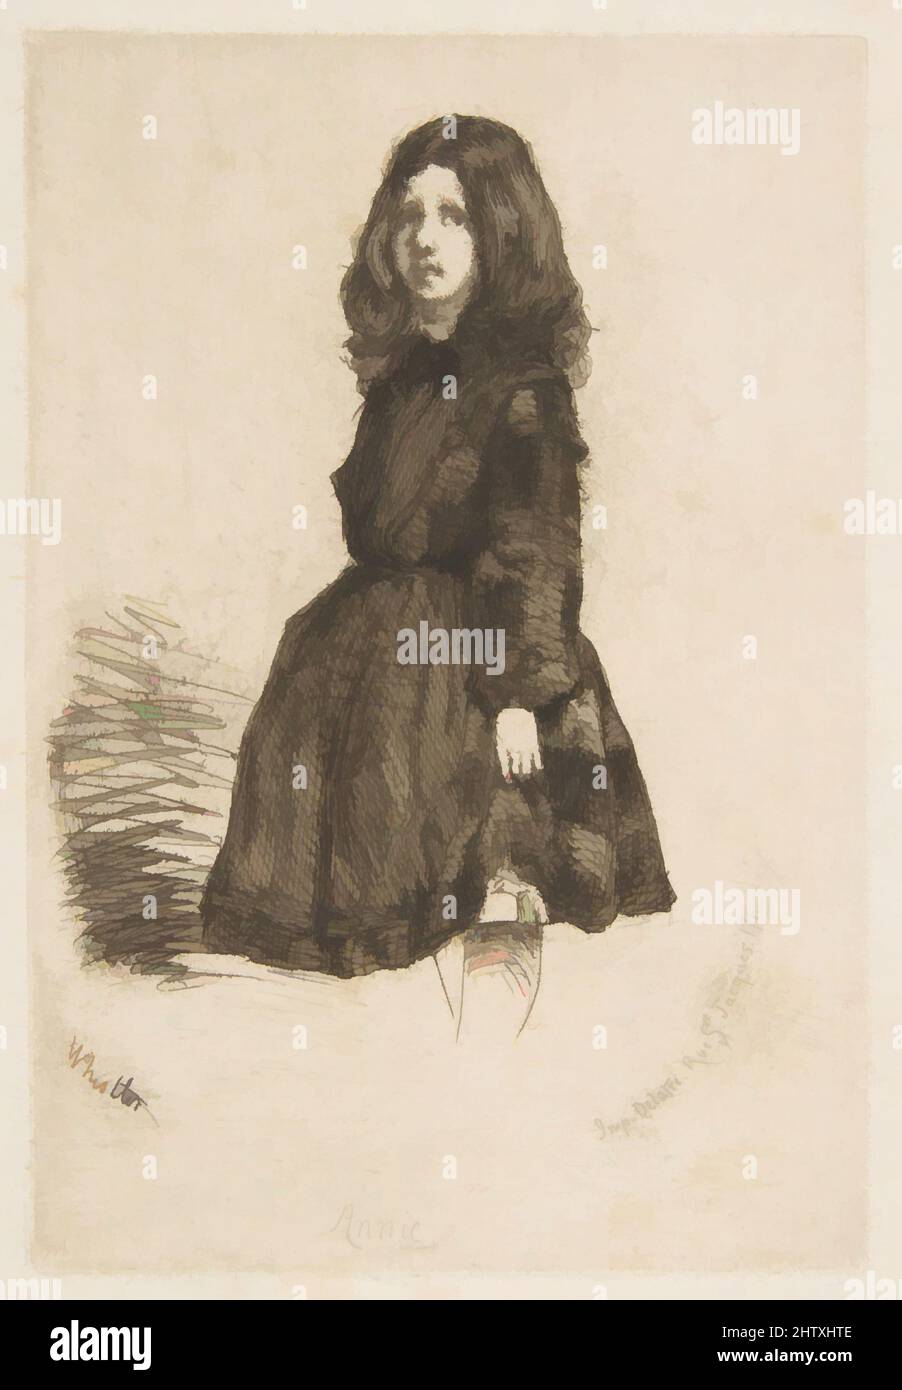 Art inspired by Annie, 1857–58, Etching; sixth state of seven (Glasgow); printed in black ink on fibrous ivory laid paper, Plate: 4 5/8 x 3 1/8 in. (11.7 x 7.9 cm), Prints, James McNeill Whistler (American, Lowell, Massachusetts 1834–1903 London, Classic works modernized by Artotop with a splash of modernity. Shapes, color and value, eye-catching visual impact on art. Emotions through freedom of artworks in a contemporary way. A timeless message pursuing a wildly creative new direction. Artists turning to the digital medium and creating the Artotop NFT Stock Photo